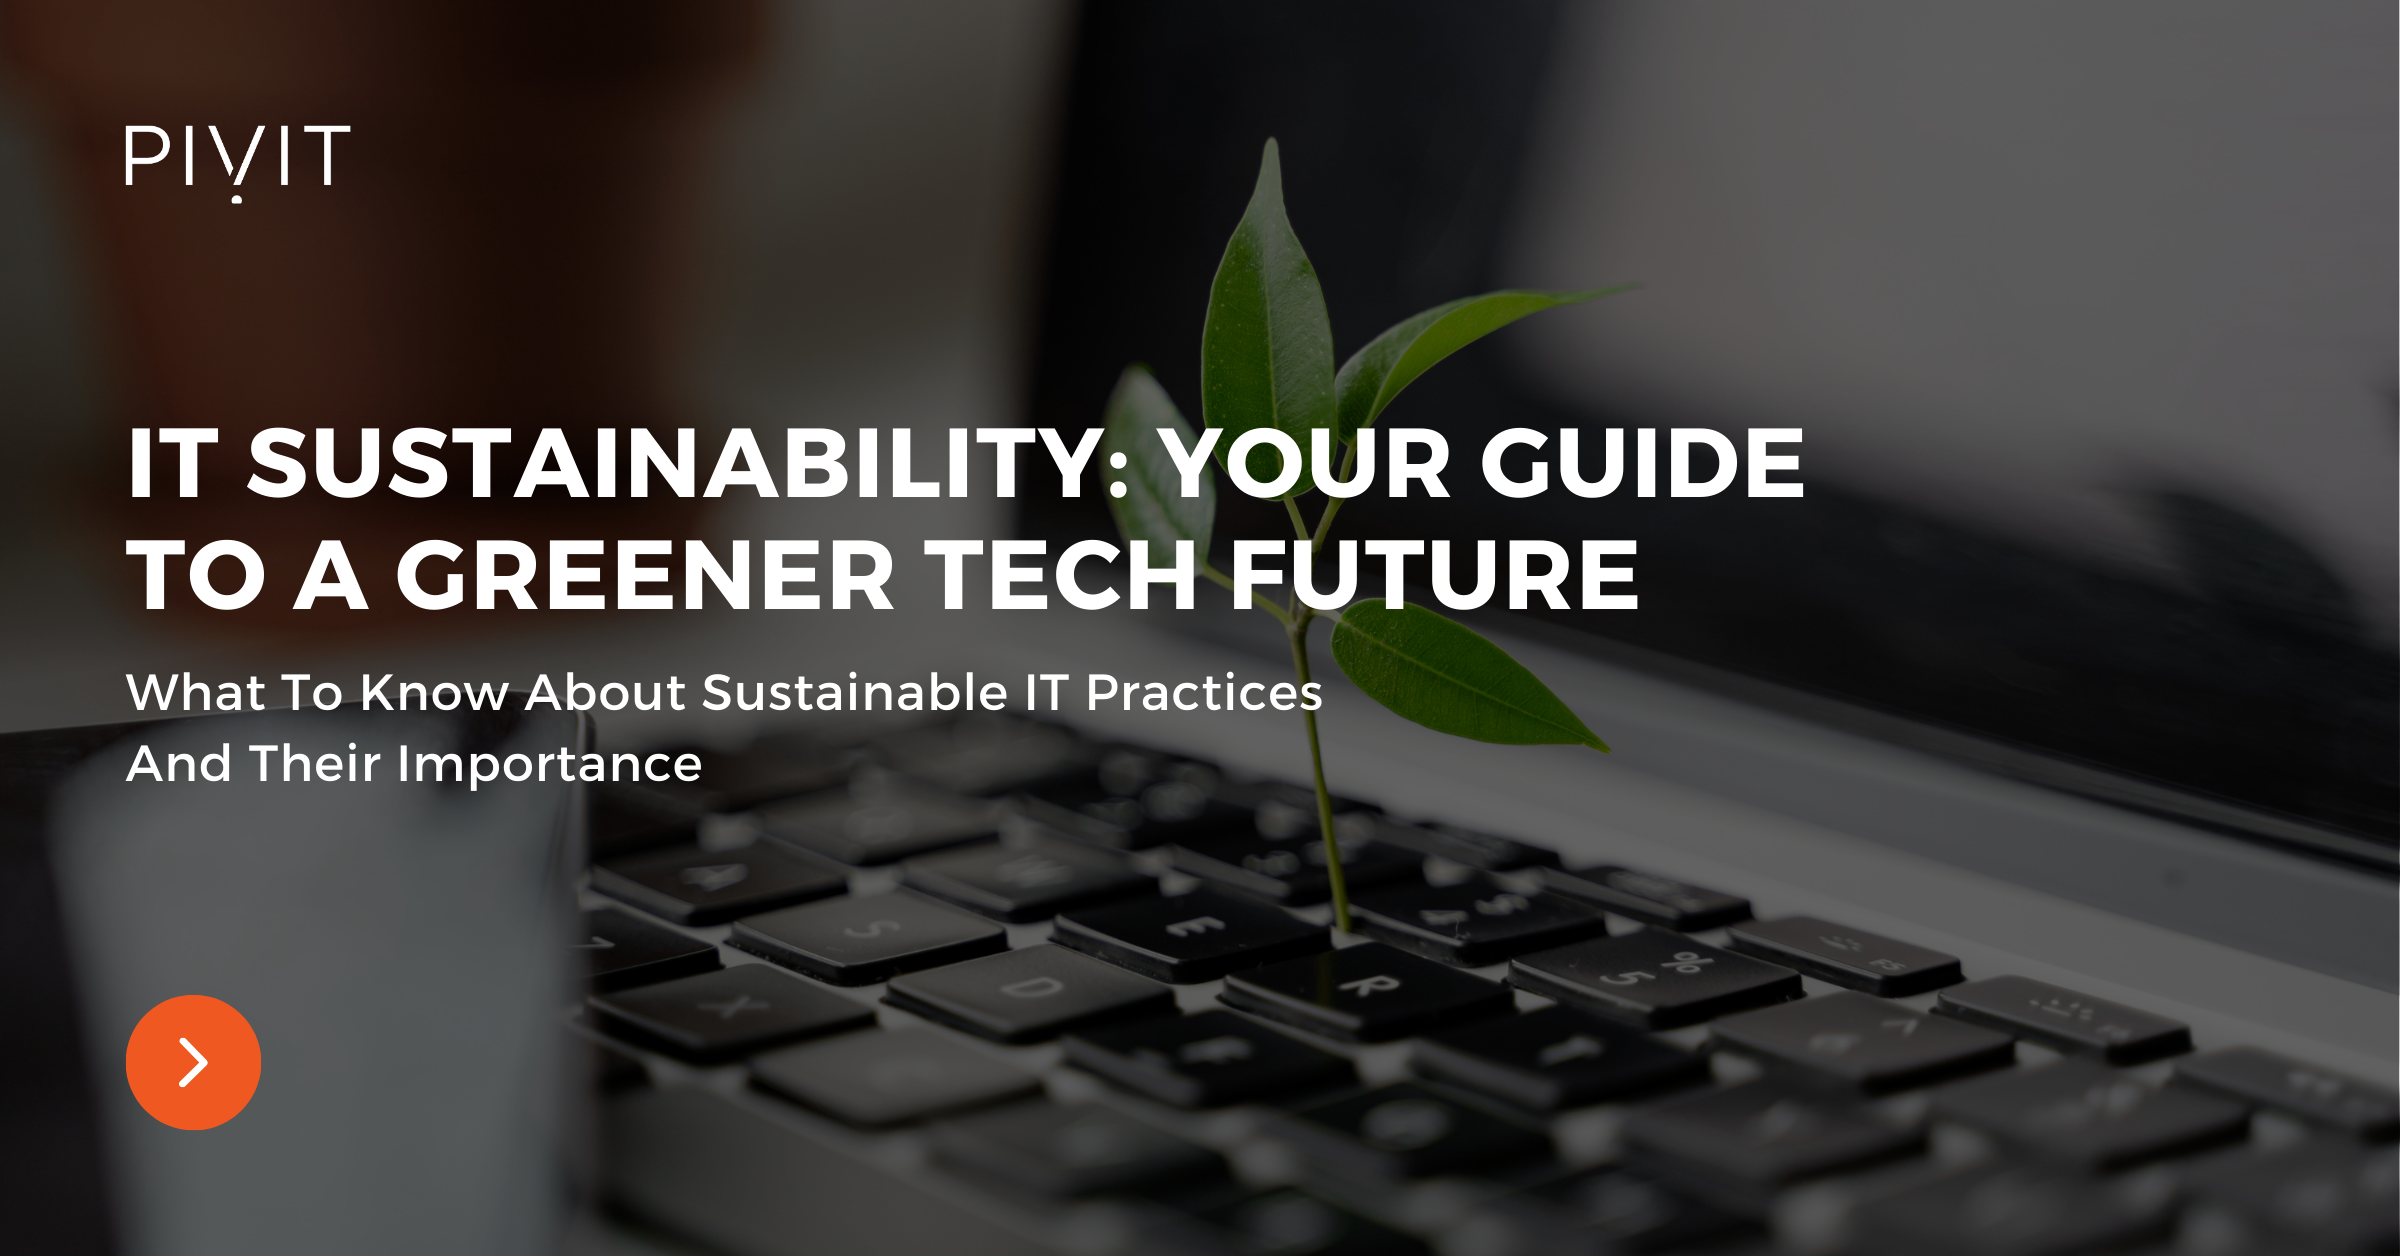 What To Know About Sustainable It Practices And Their Importance - IT Sustainability: Your Guide To A Greener Tech Future